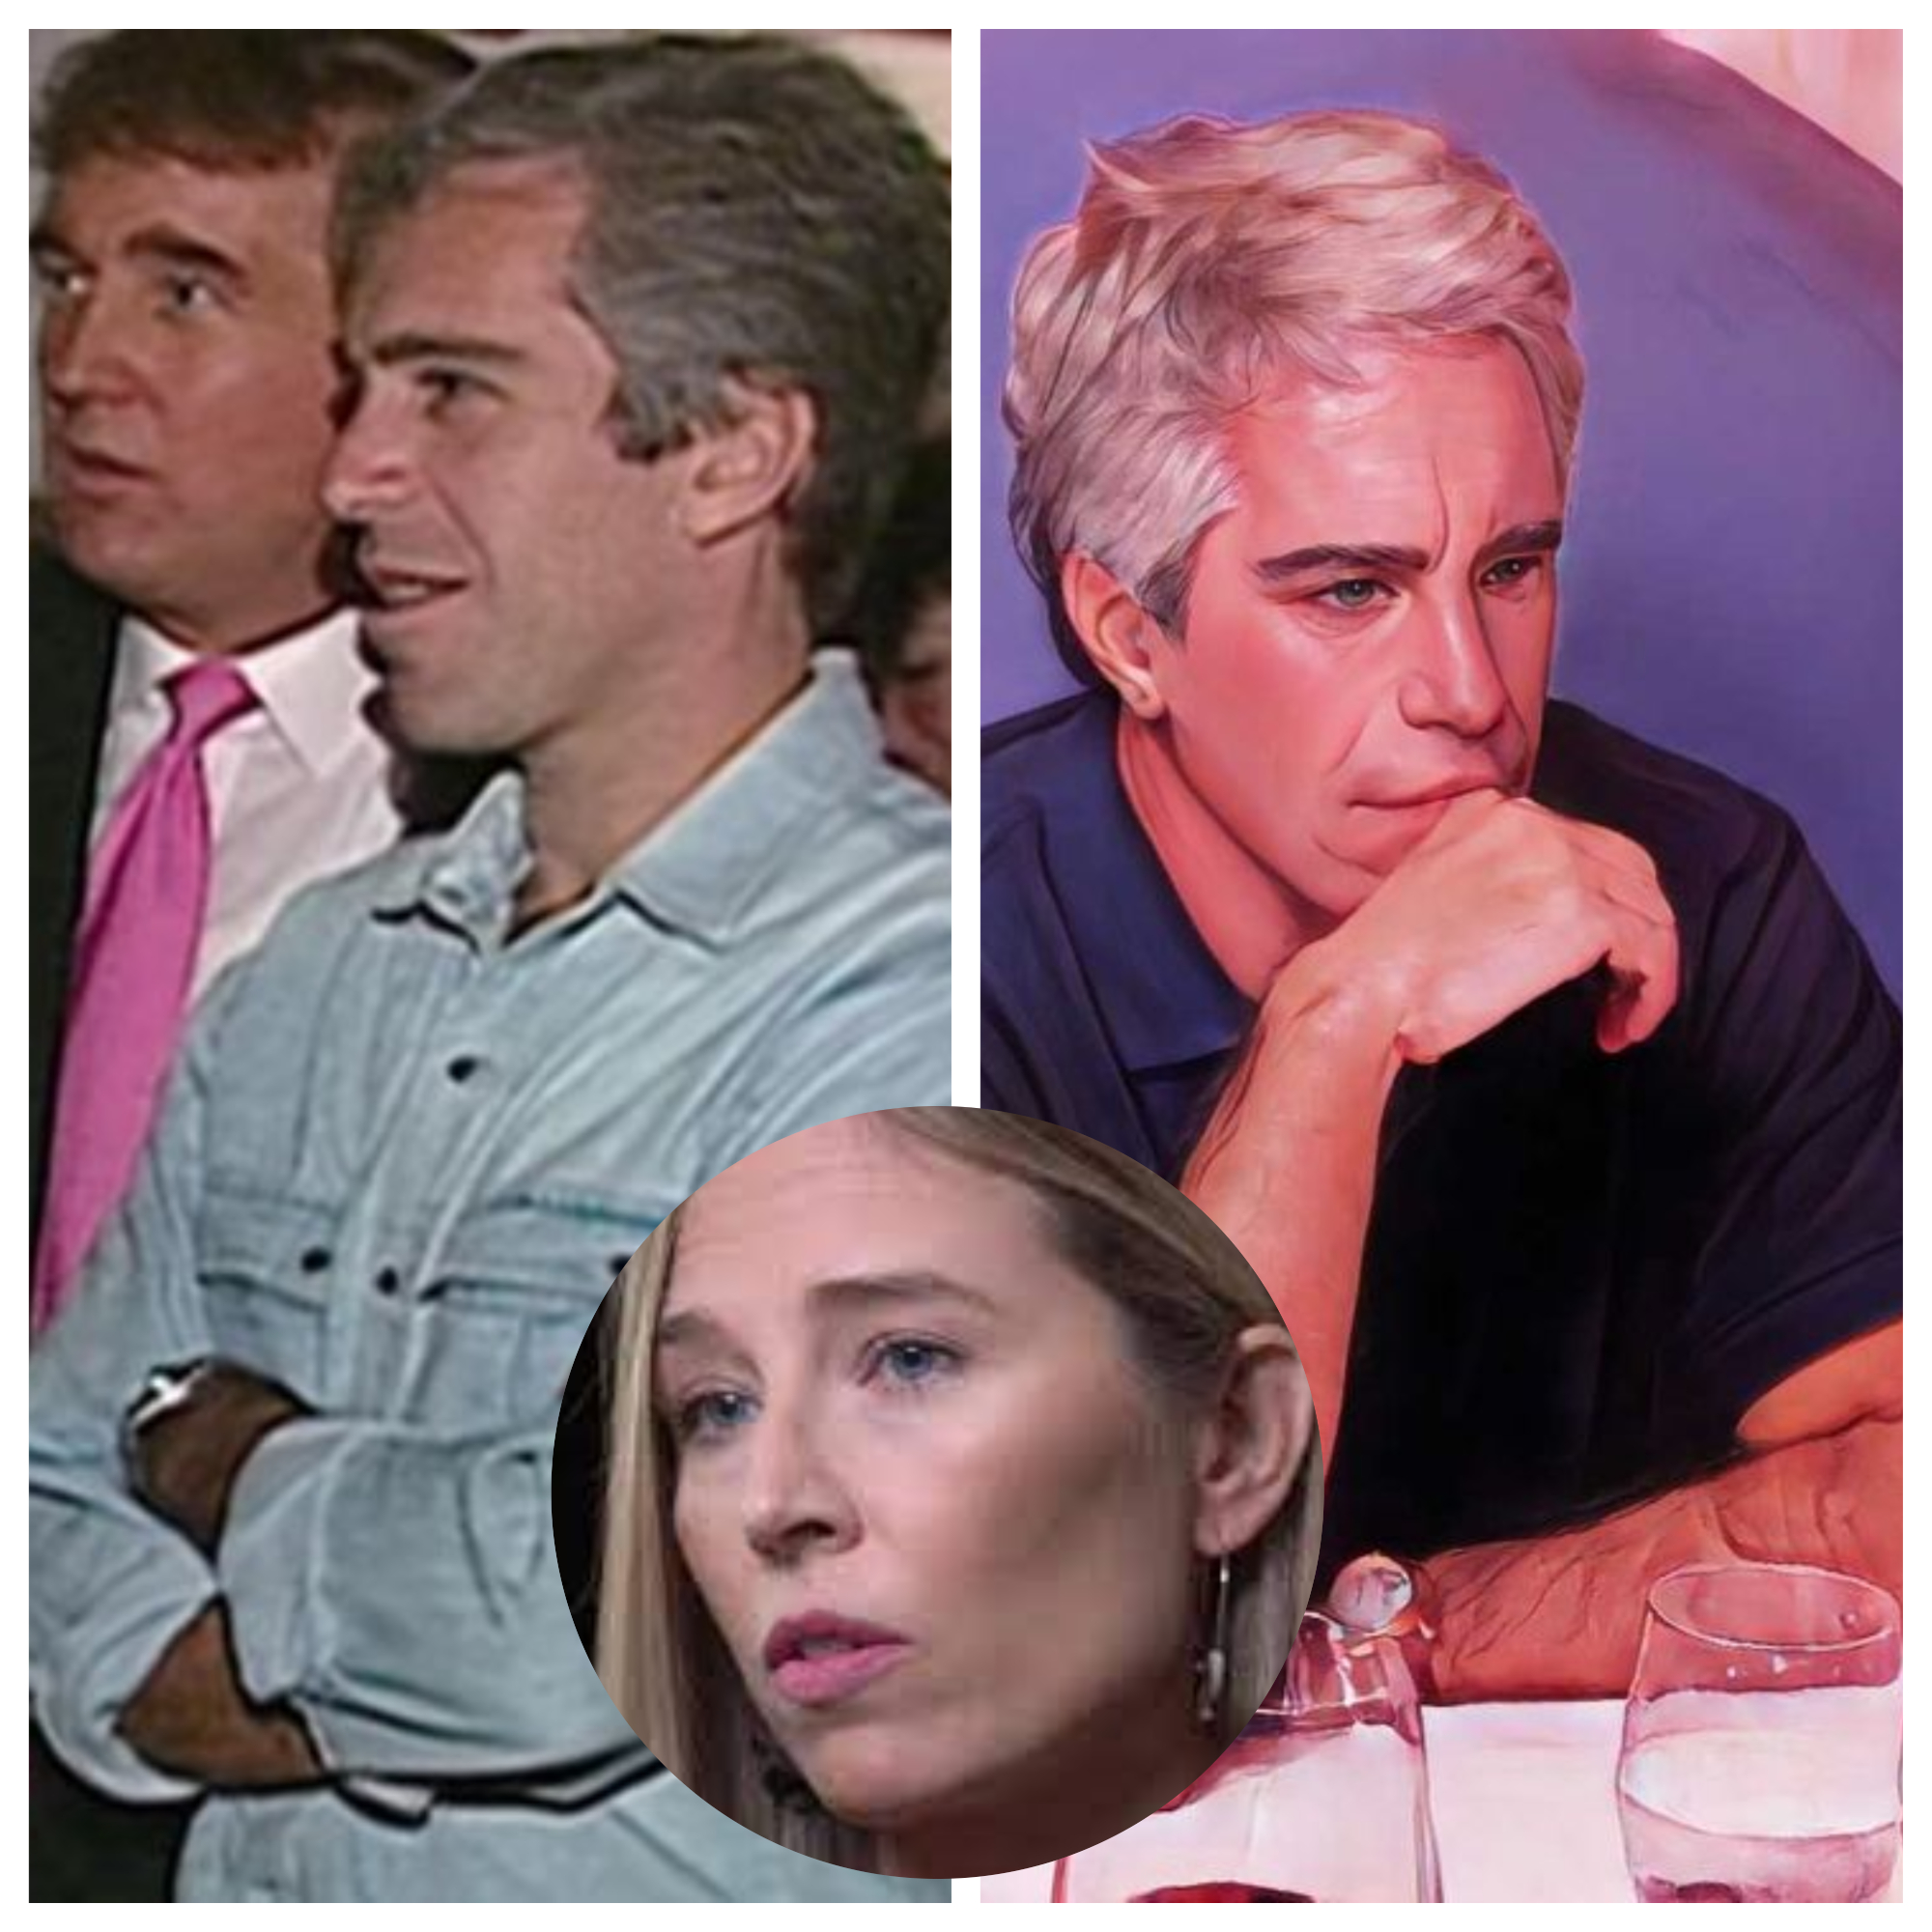 Two women tried to expose Jeffrey Epstein three decades ago. Why didn’t the FBI stop him?